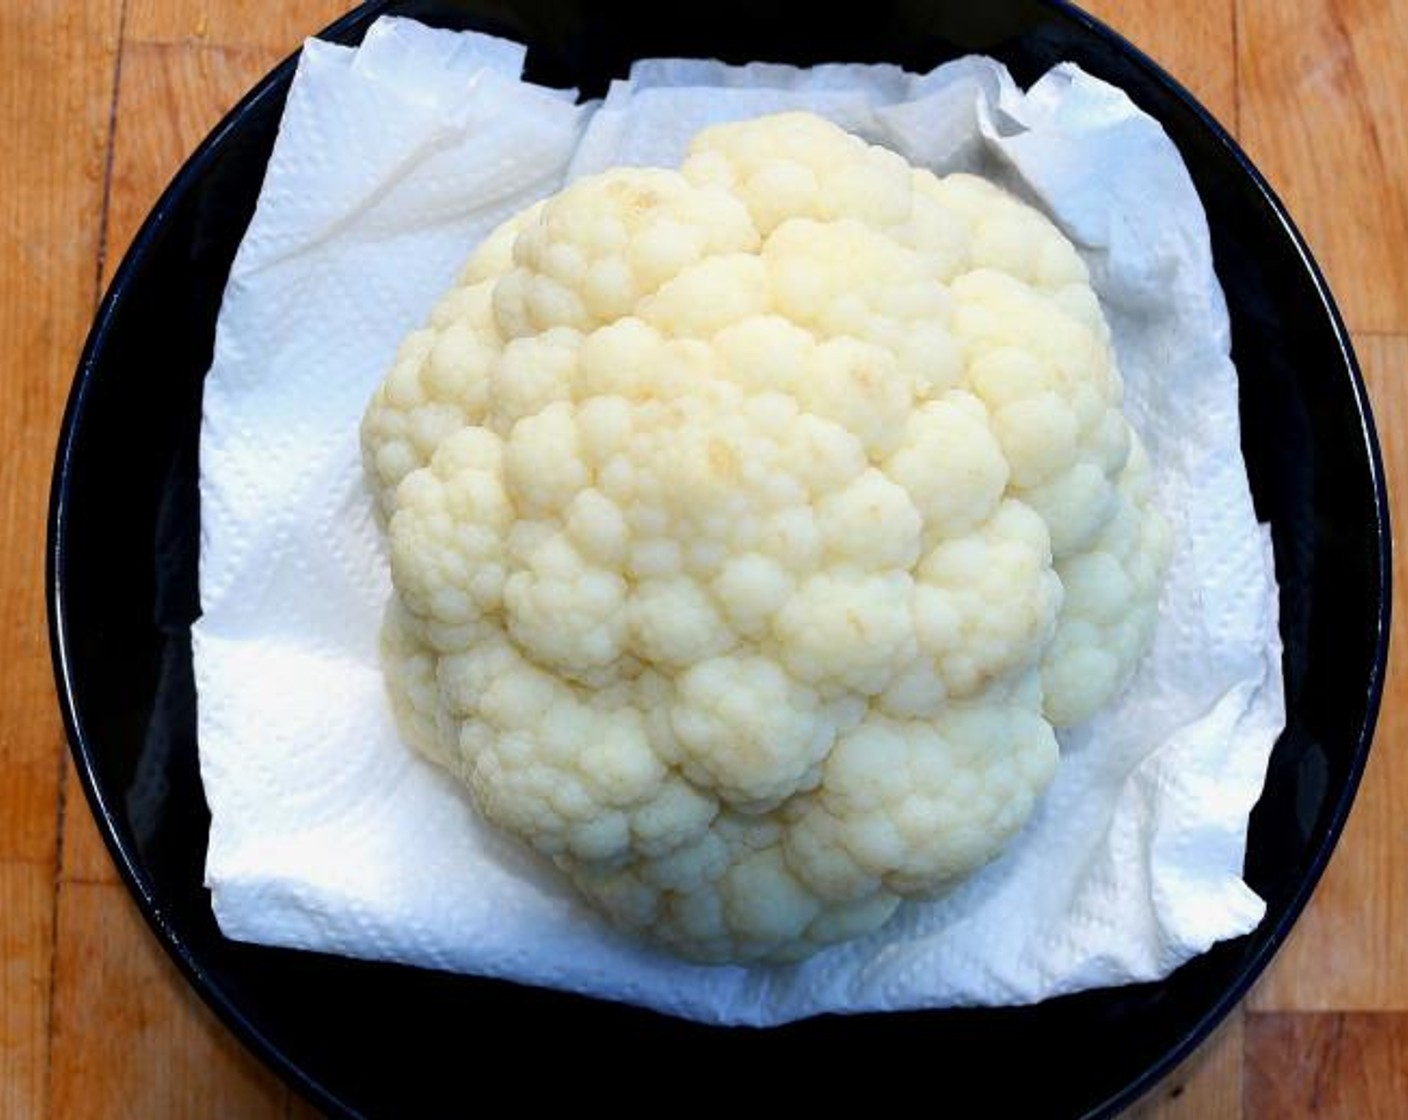 step 2 Rest the cauliflower on absorbent paper until dry, about 15 minutes.